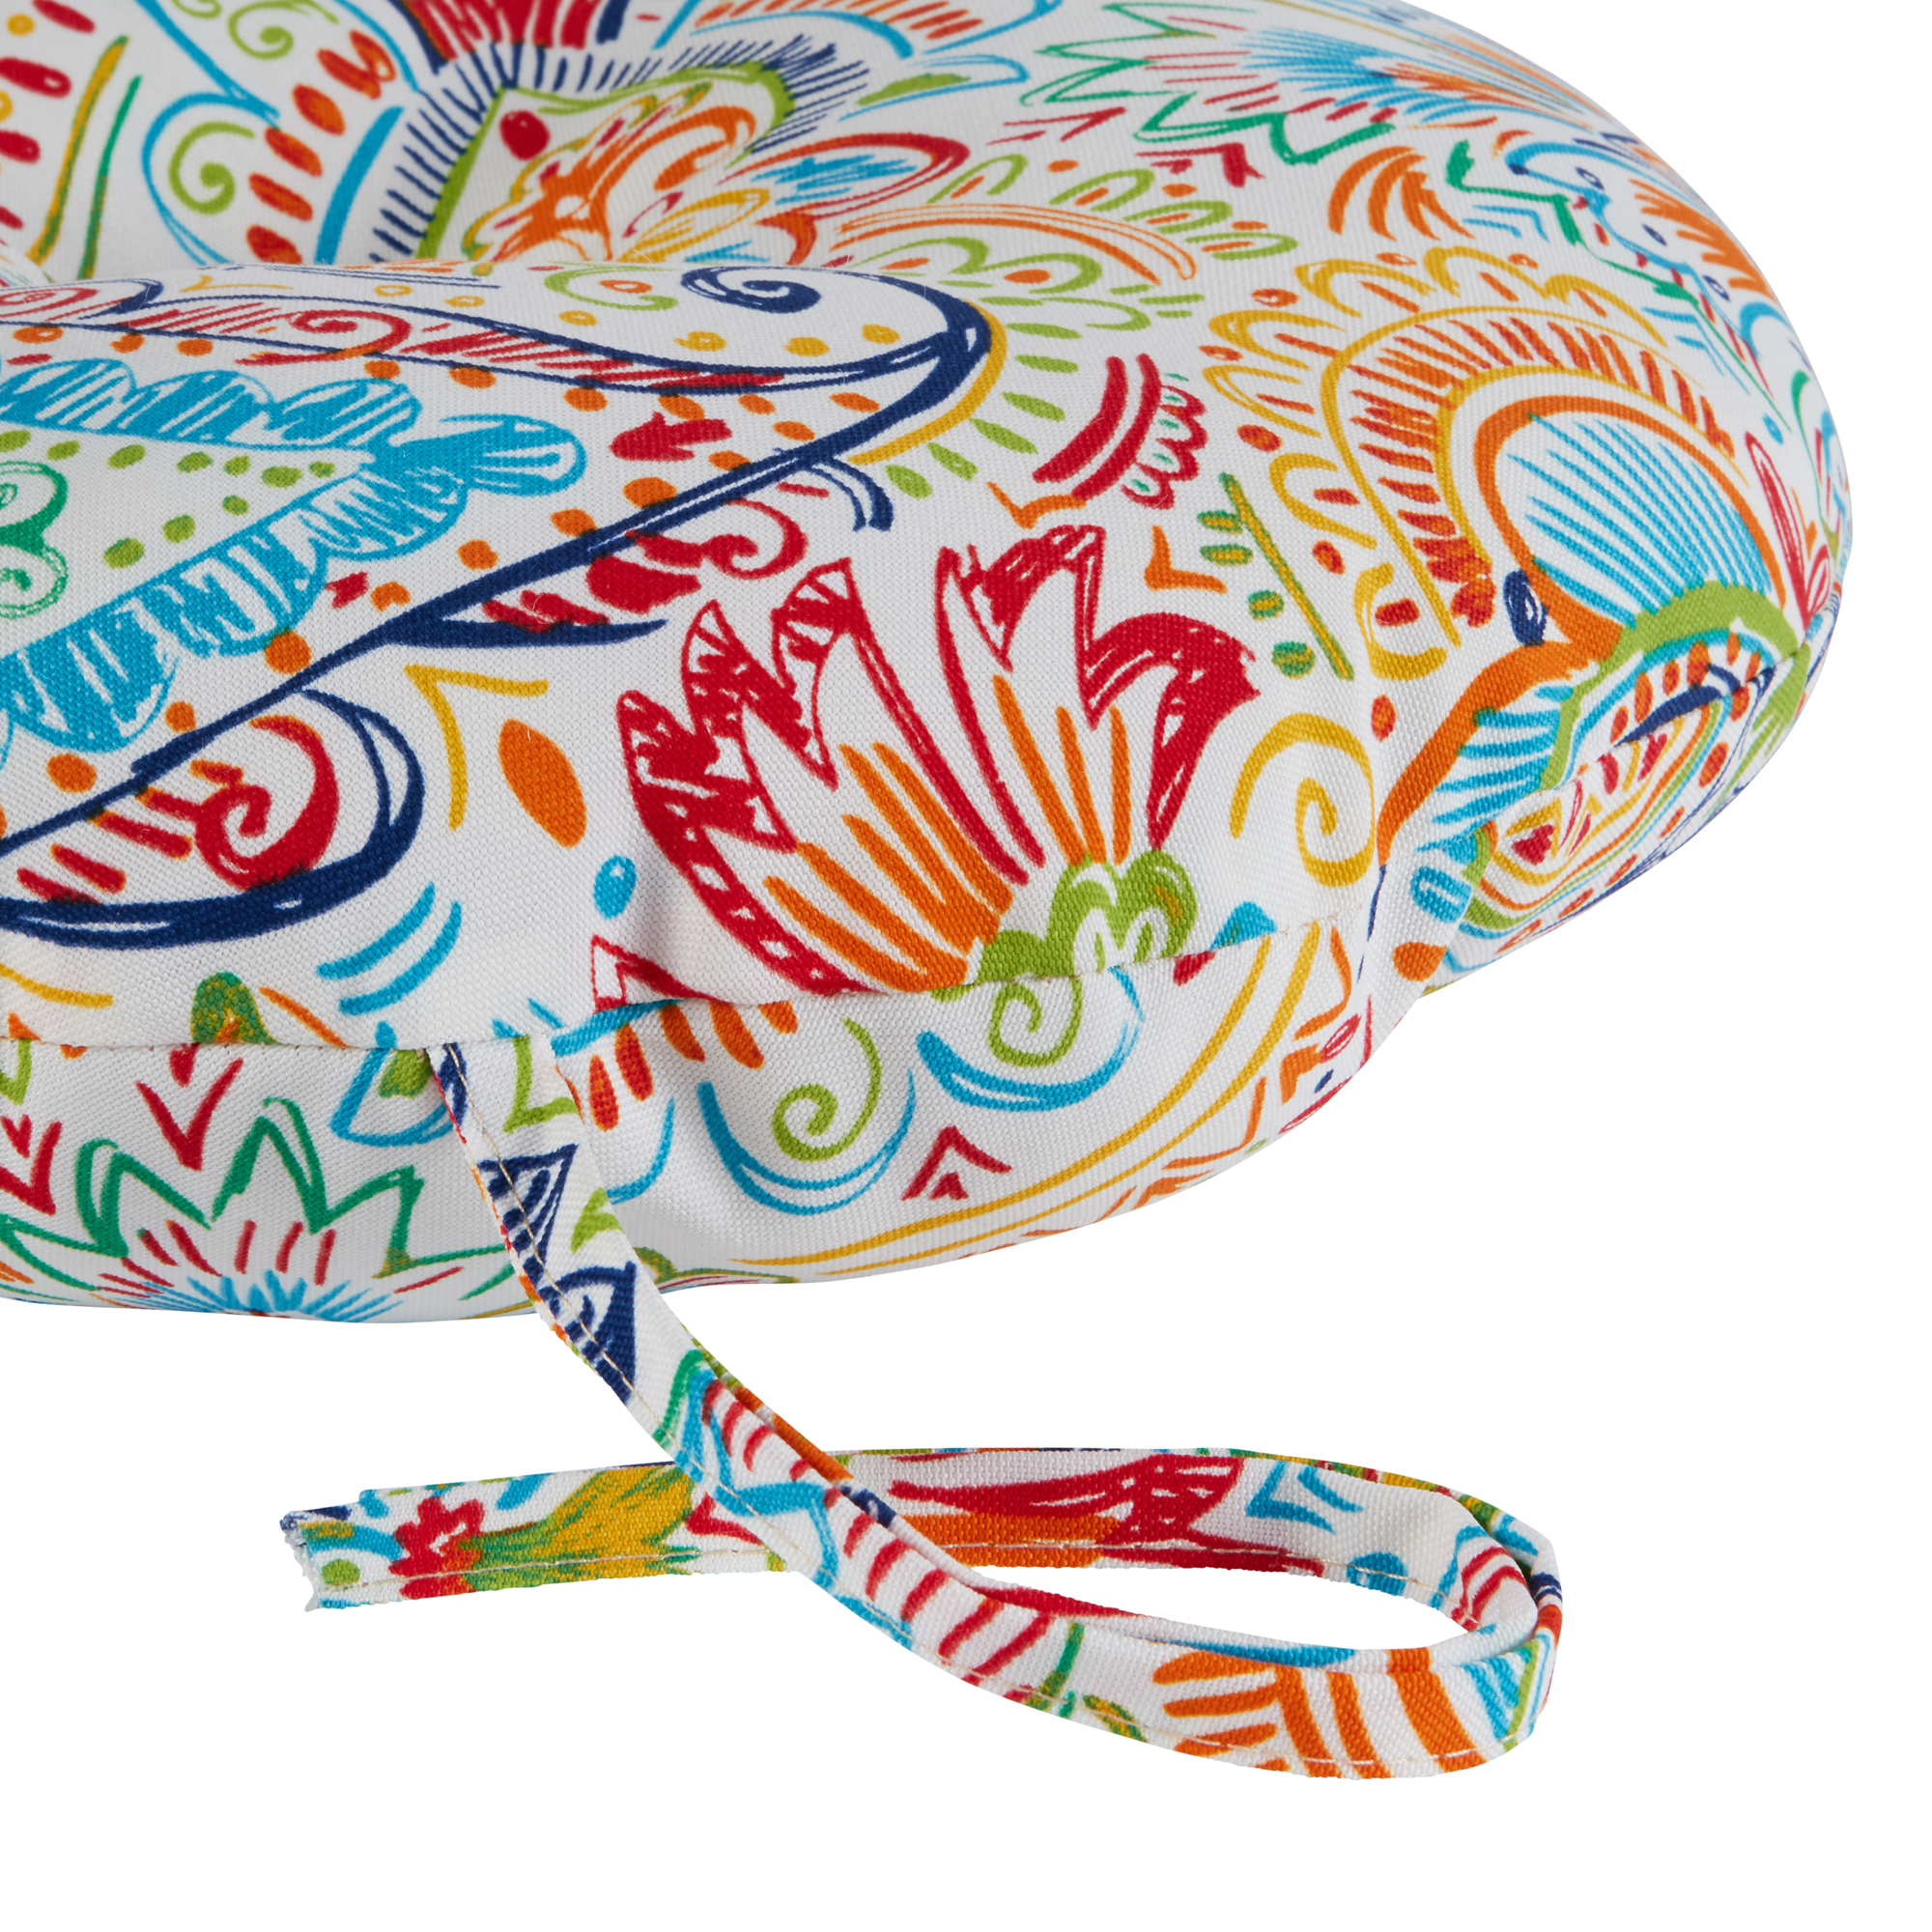 Greendale Home Fashions Jamboree Paisley 15 in. Round Outdoor Reversible Bistro Seat Cushion (Set of 2) - image 3 of 7